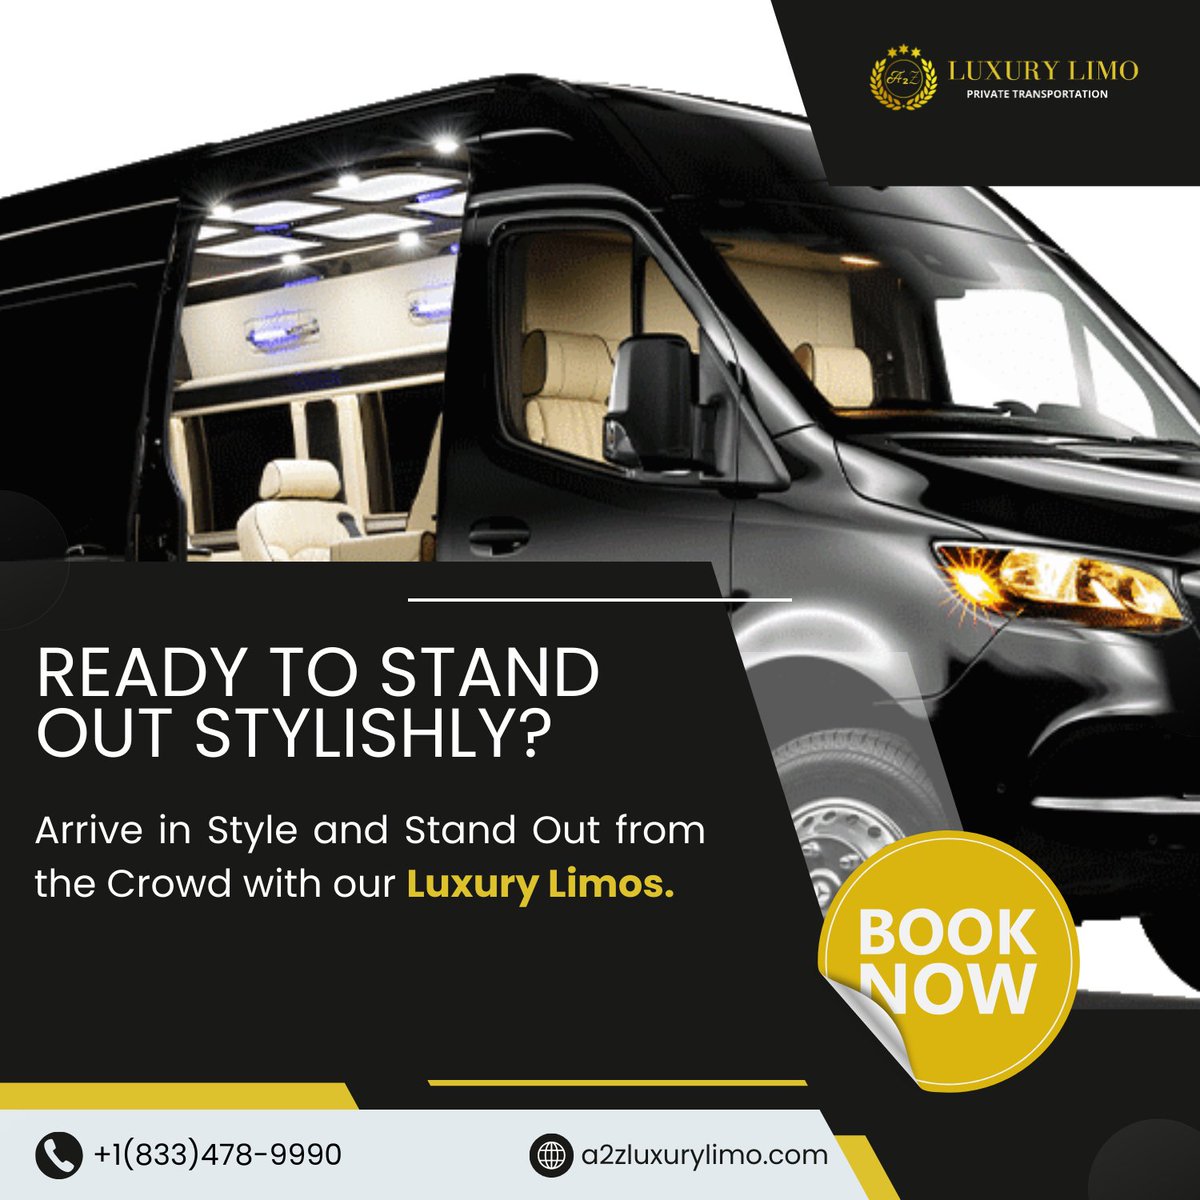 Ready to stand out stylishly?
Arrive in style and stand out from the crowd with our luxury limos
#RideInStyle #ArriveInLuxury #PerfectRide #DTWTransfers #CelebrateInClass #LuxuryTransportation #MemorableJourneys #ElegantArrivals #TravelInComfort #a2zluxurylimo